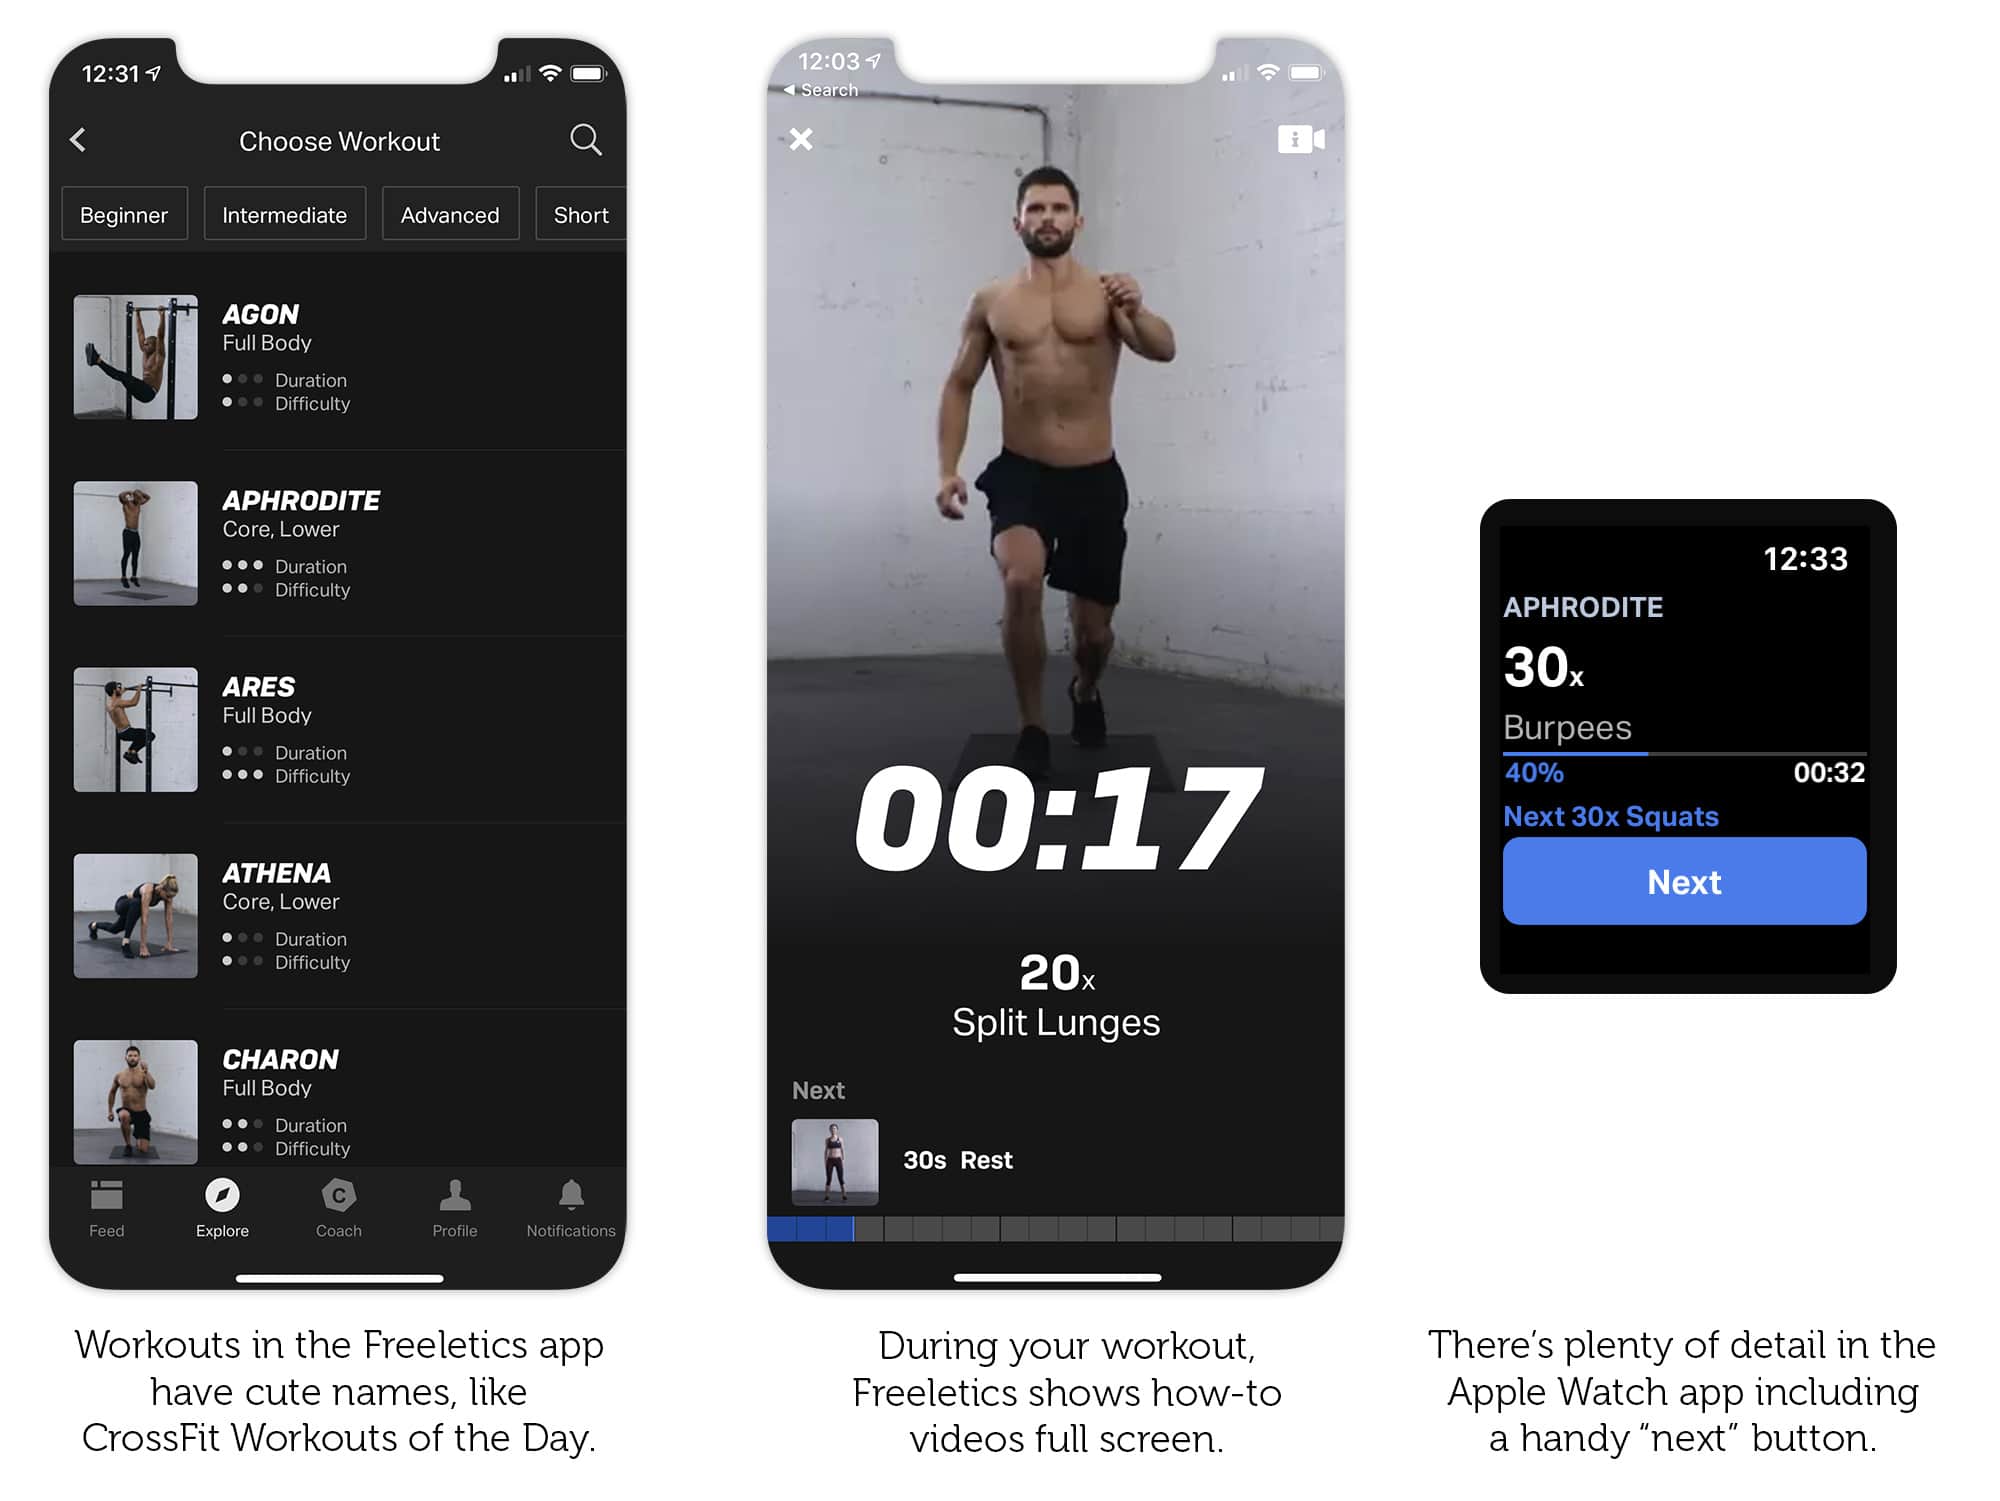 Ready to tackle leg day? Freeletics Personal Trainer is a pricey upgrade.